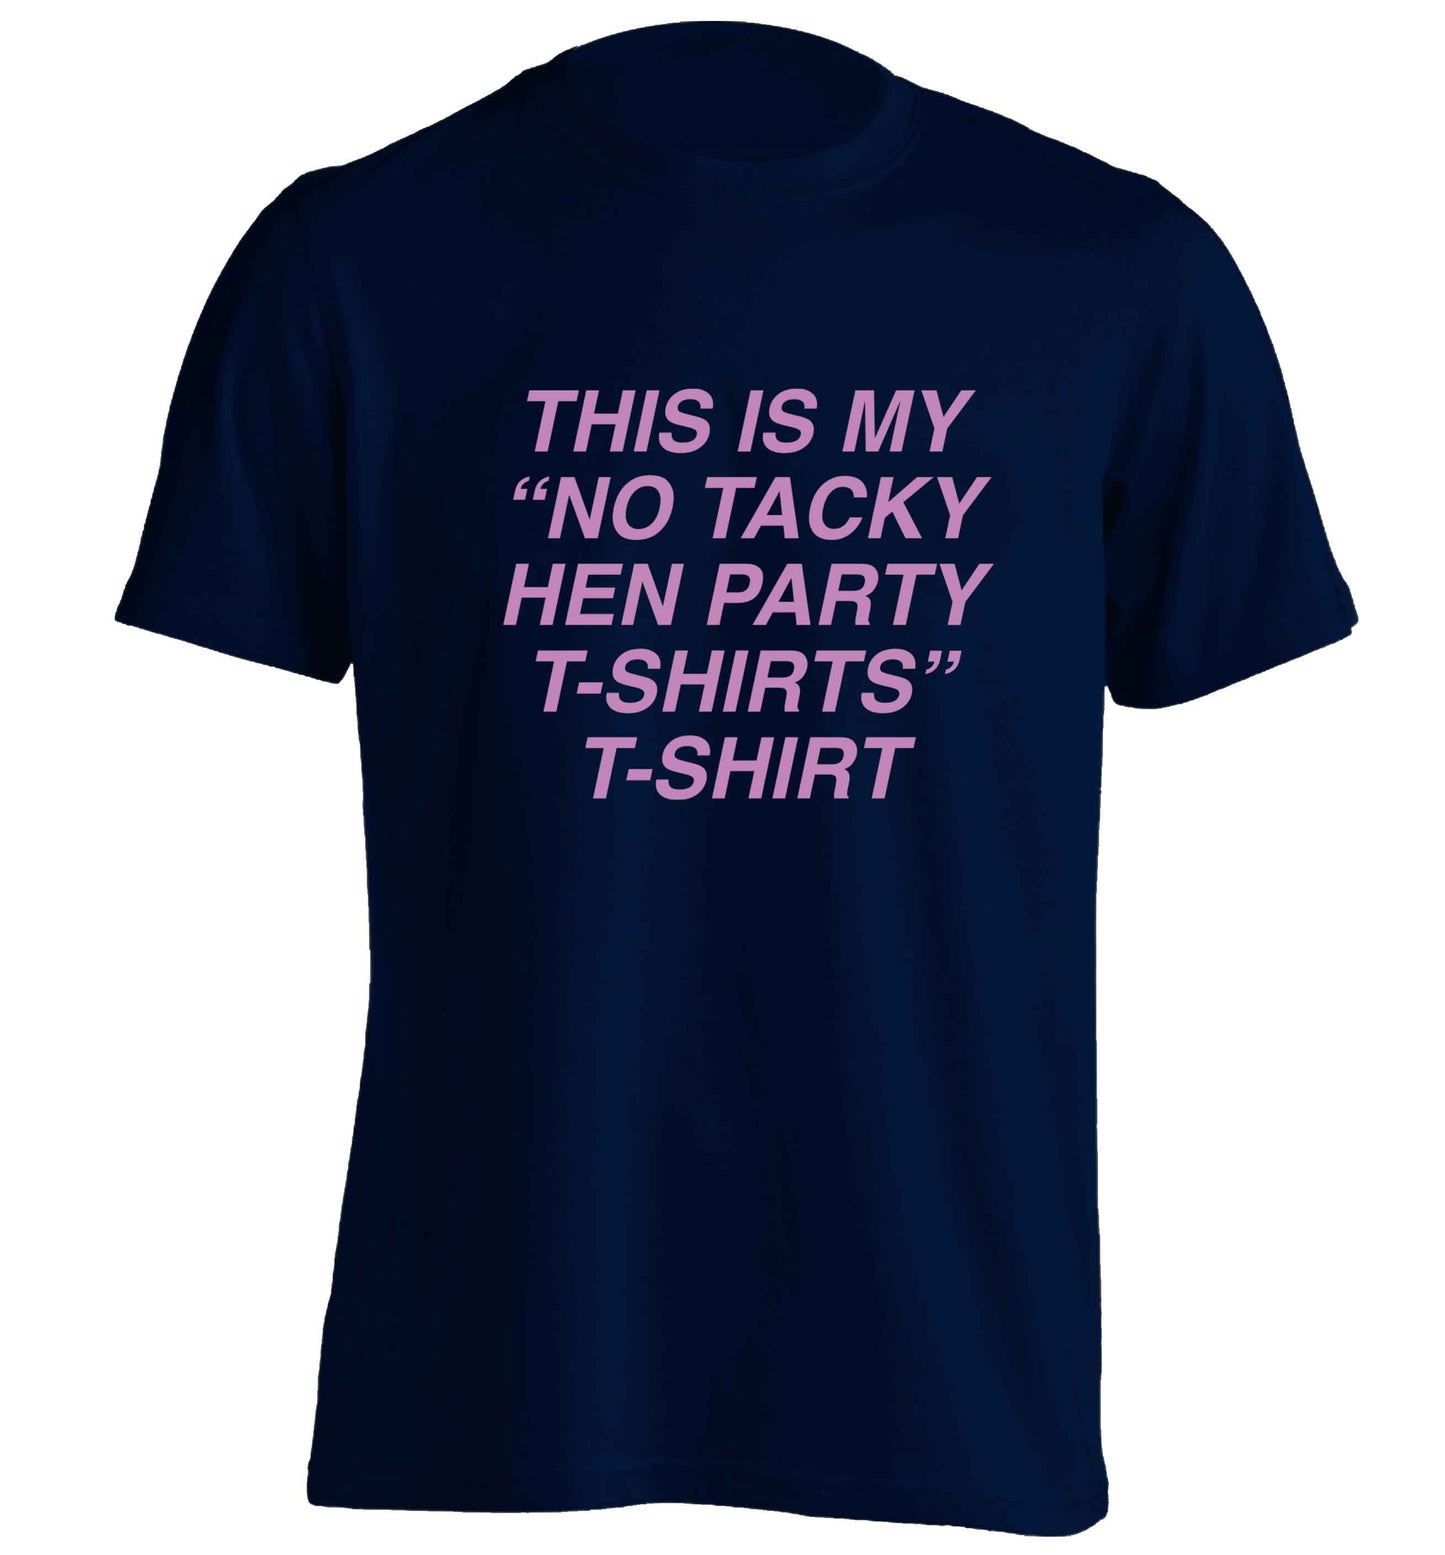 This is my 'no tacky hen party T-Shirt'  adults unisex navy Tshirt 2XL